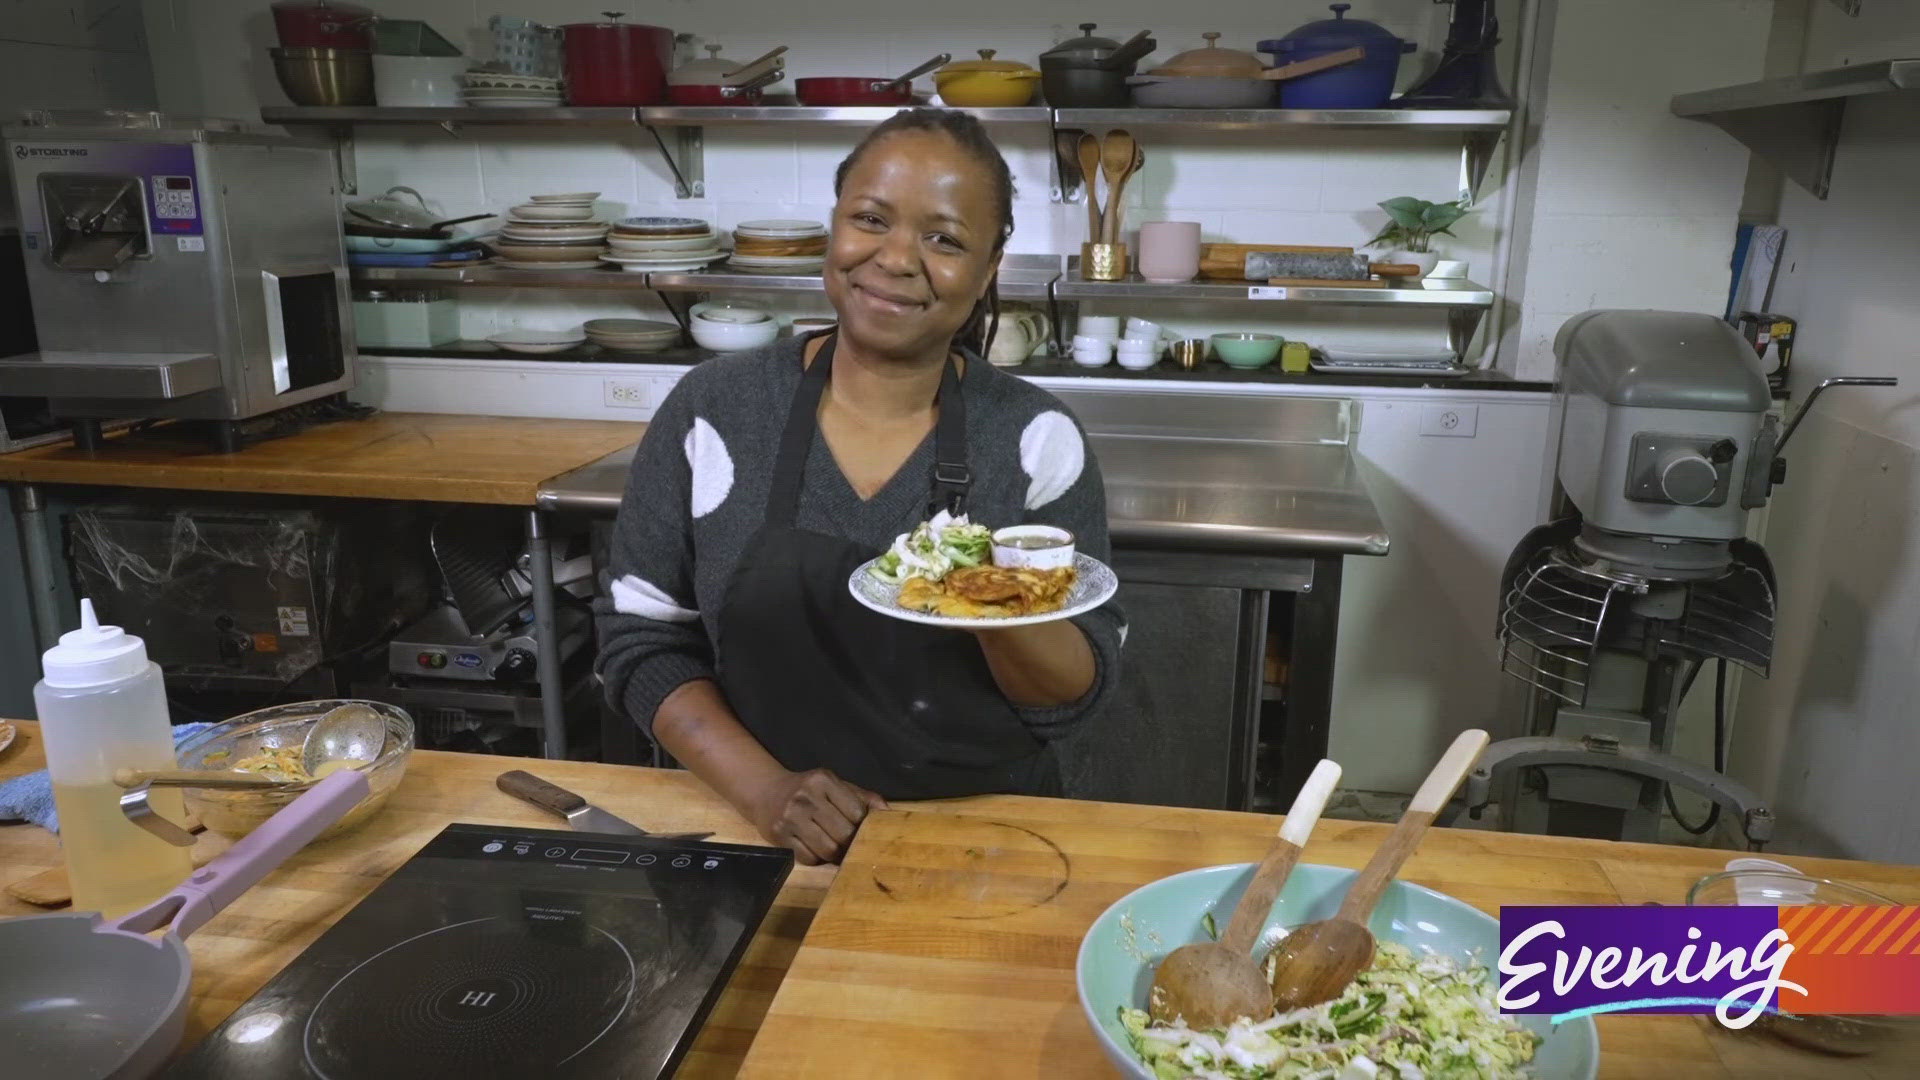 Chef Makini Howell from Plum Bistro has a recipe that will not disappoint. The Napa cabbage slaw makes it.